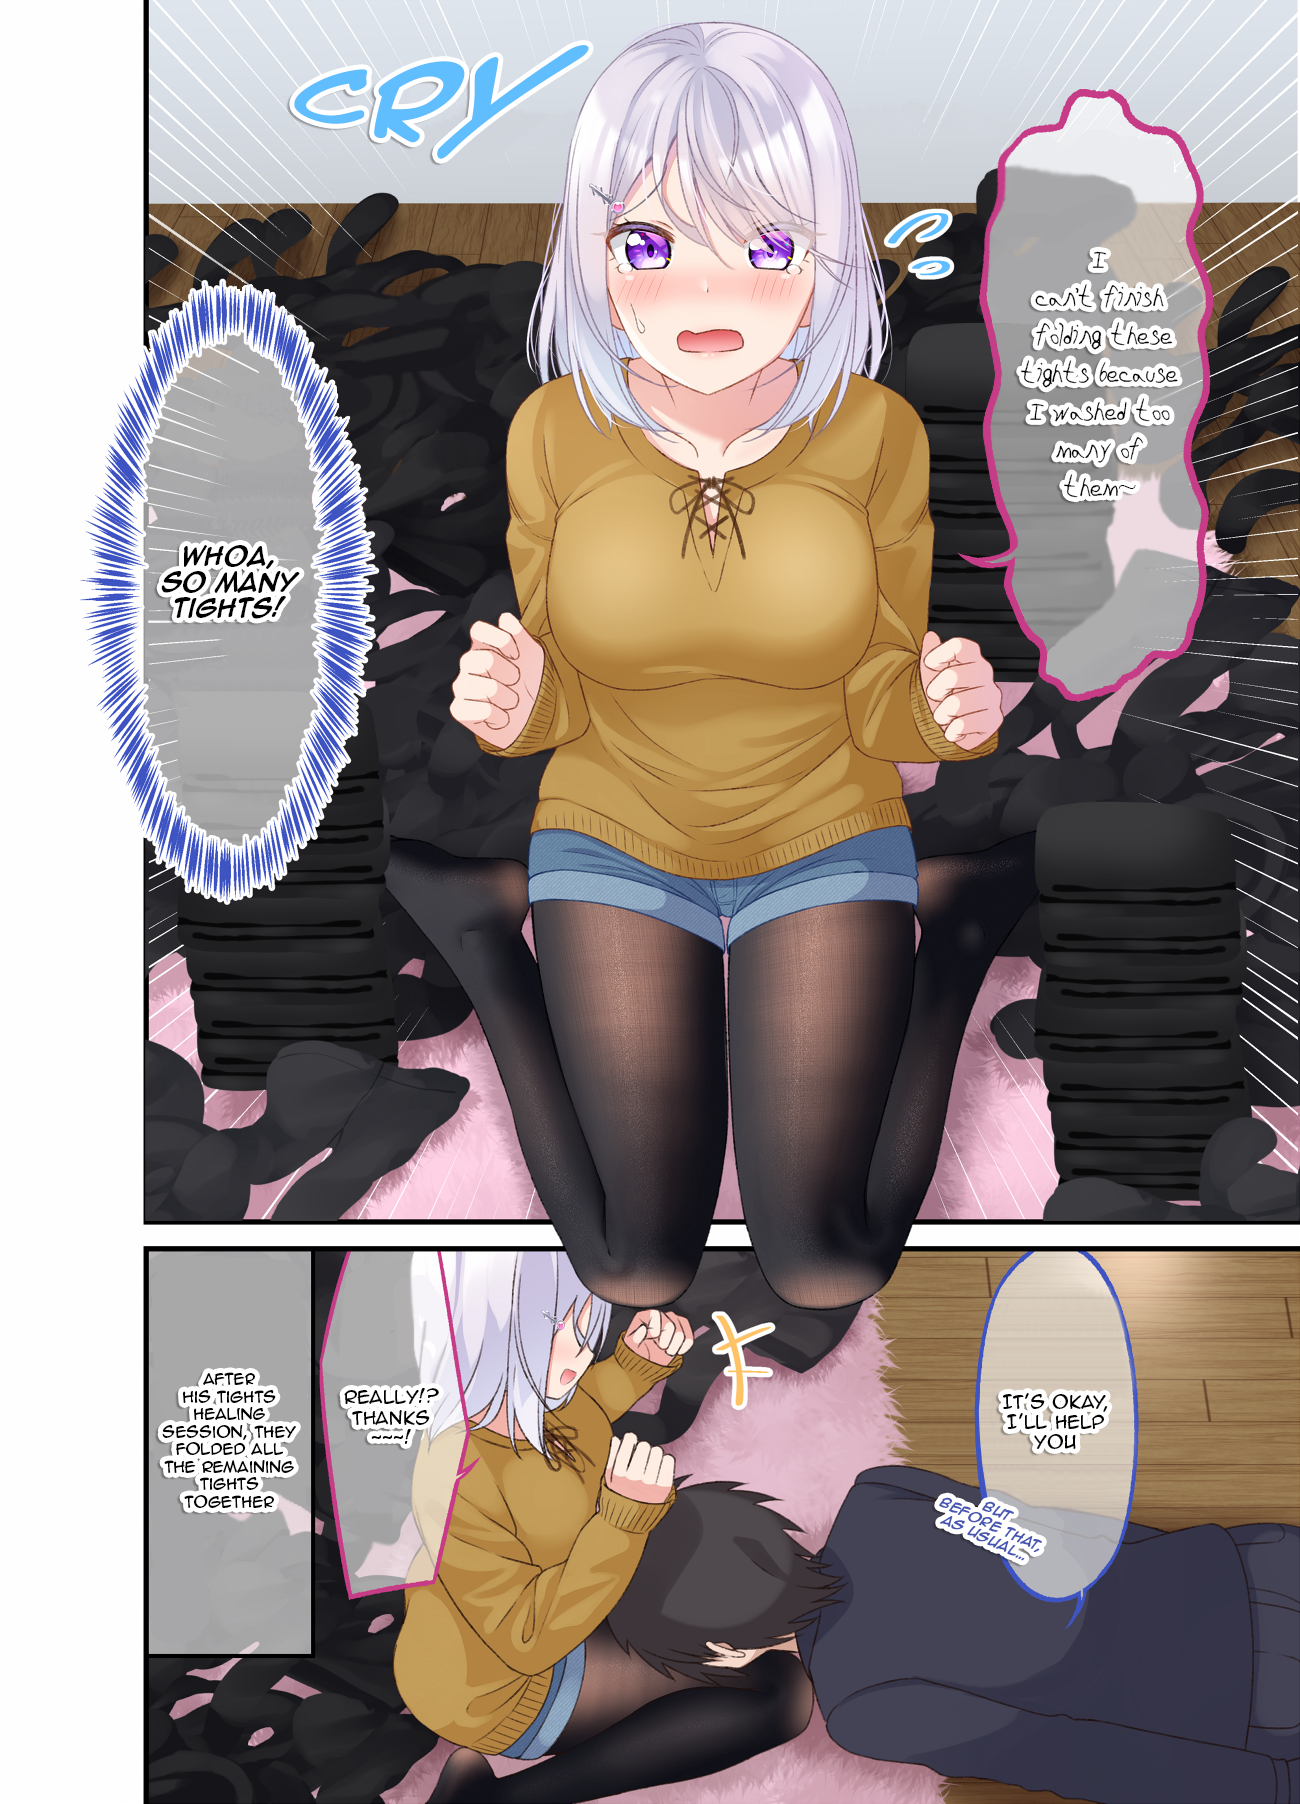 A Wife Who Heals With Tights - Page 2